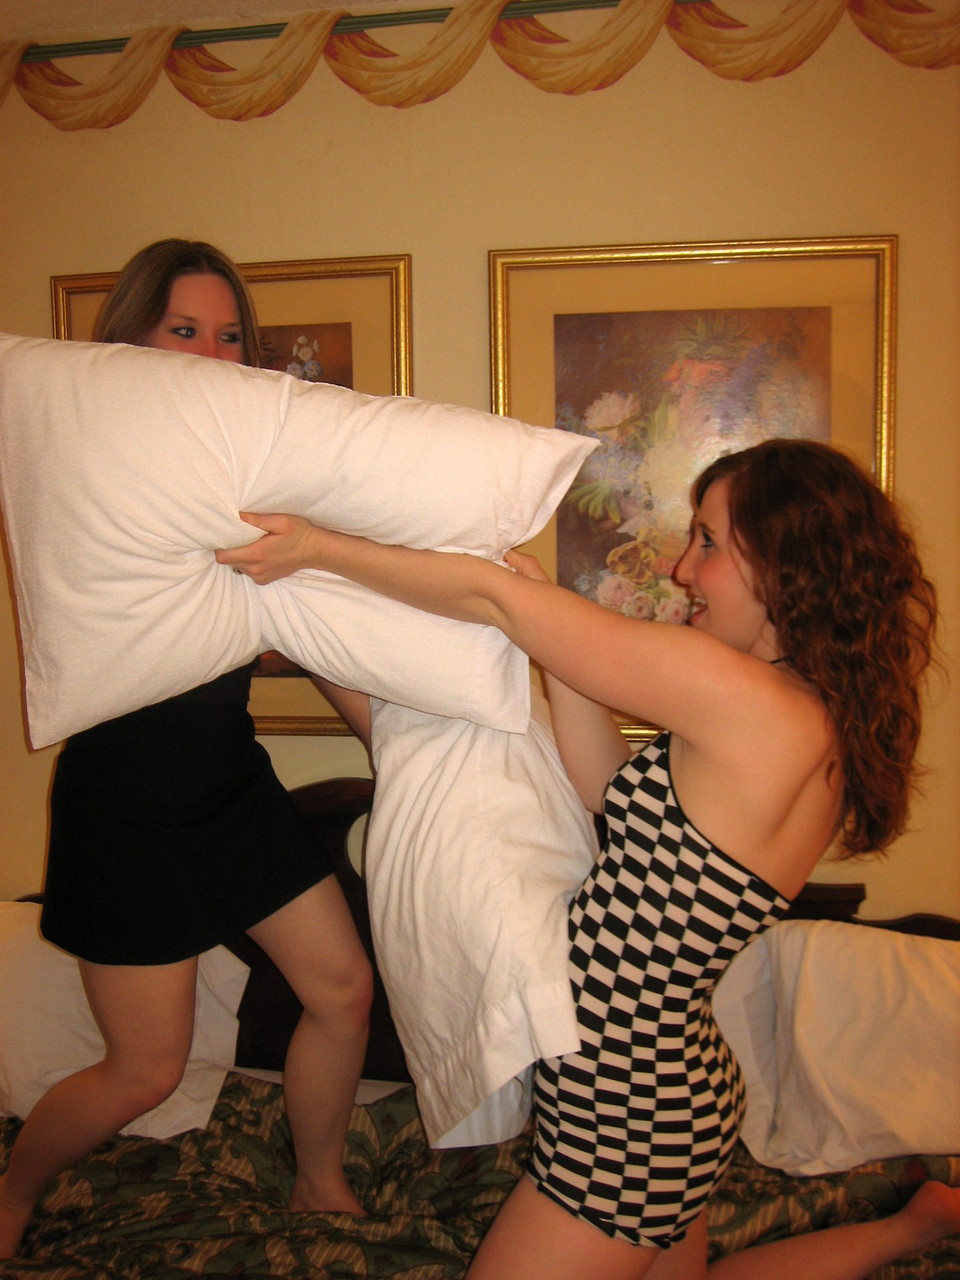 Skinny Milf Kitty Her Lesbian Stepdaughter Romancing After A Pillow Fight